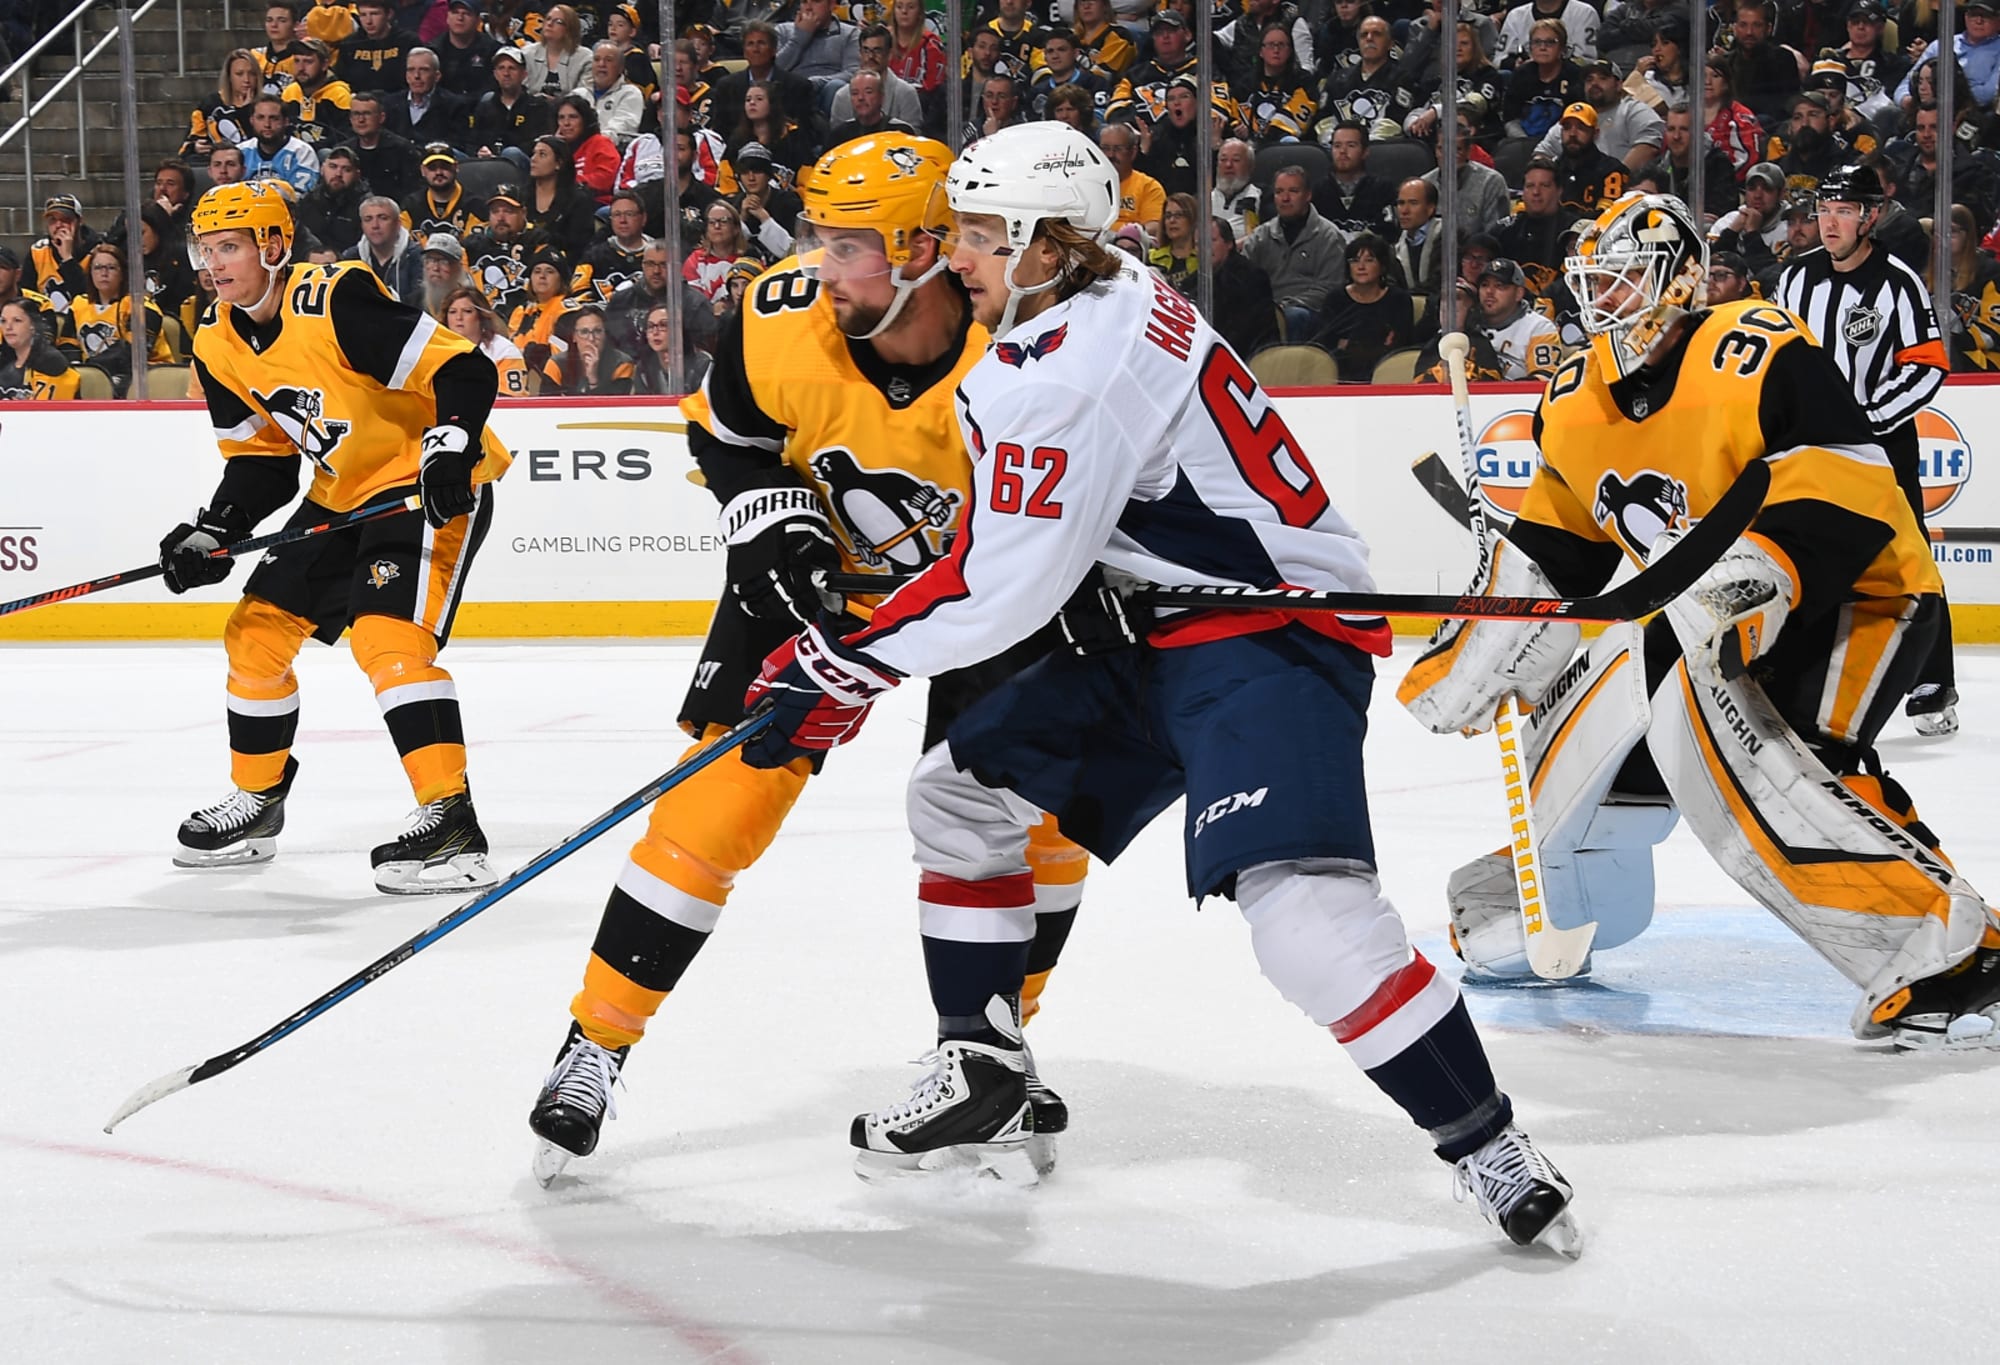 Capitals vs Penguins A Rivalry worthy of Super Sunday